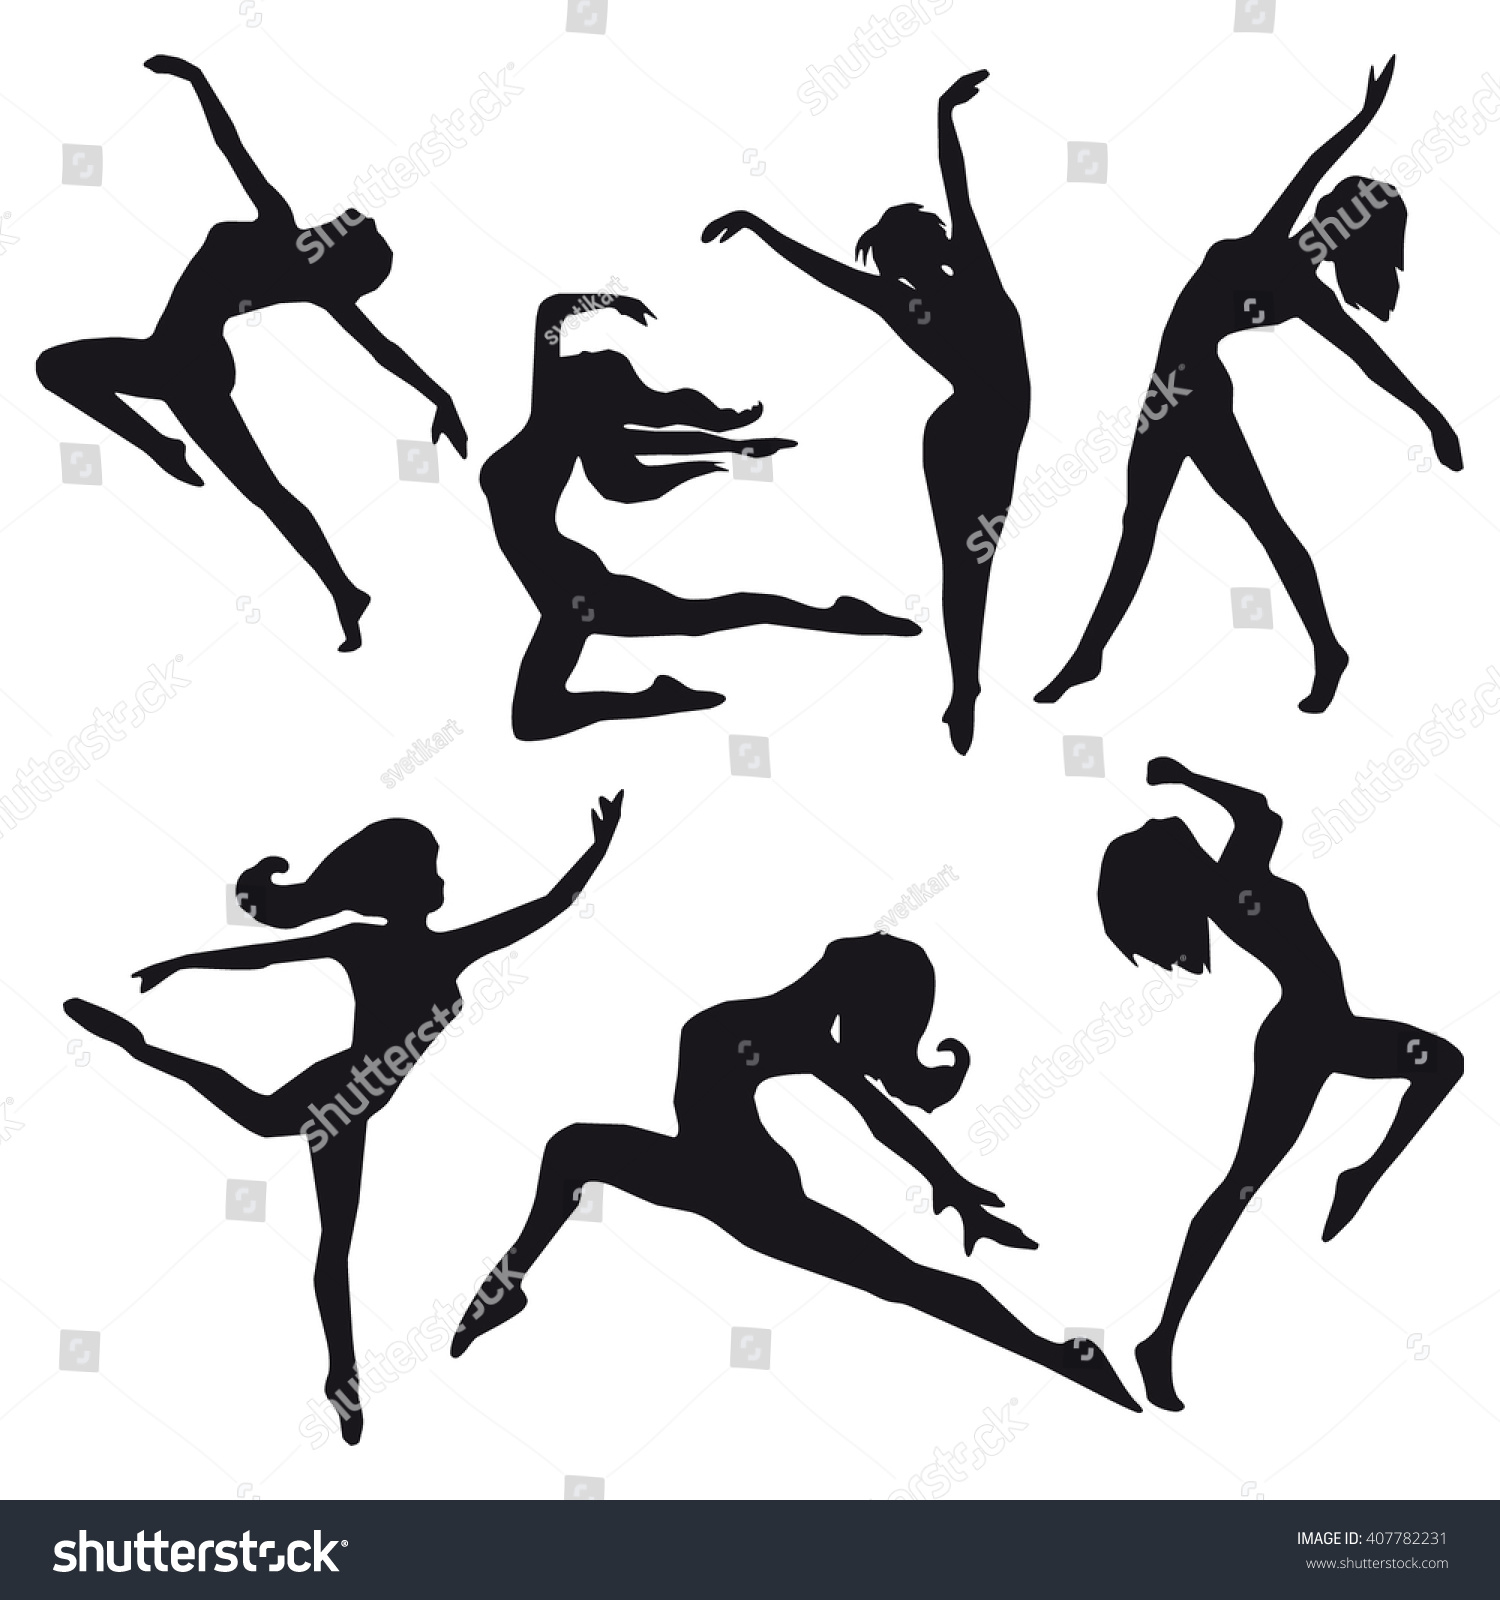 Dancer Silhouette Vector Images Collection. - 407782231 : Shutterstock